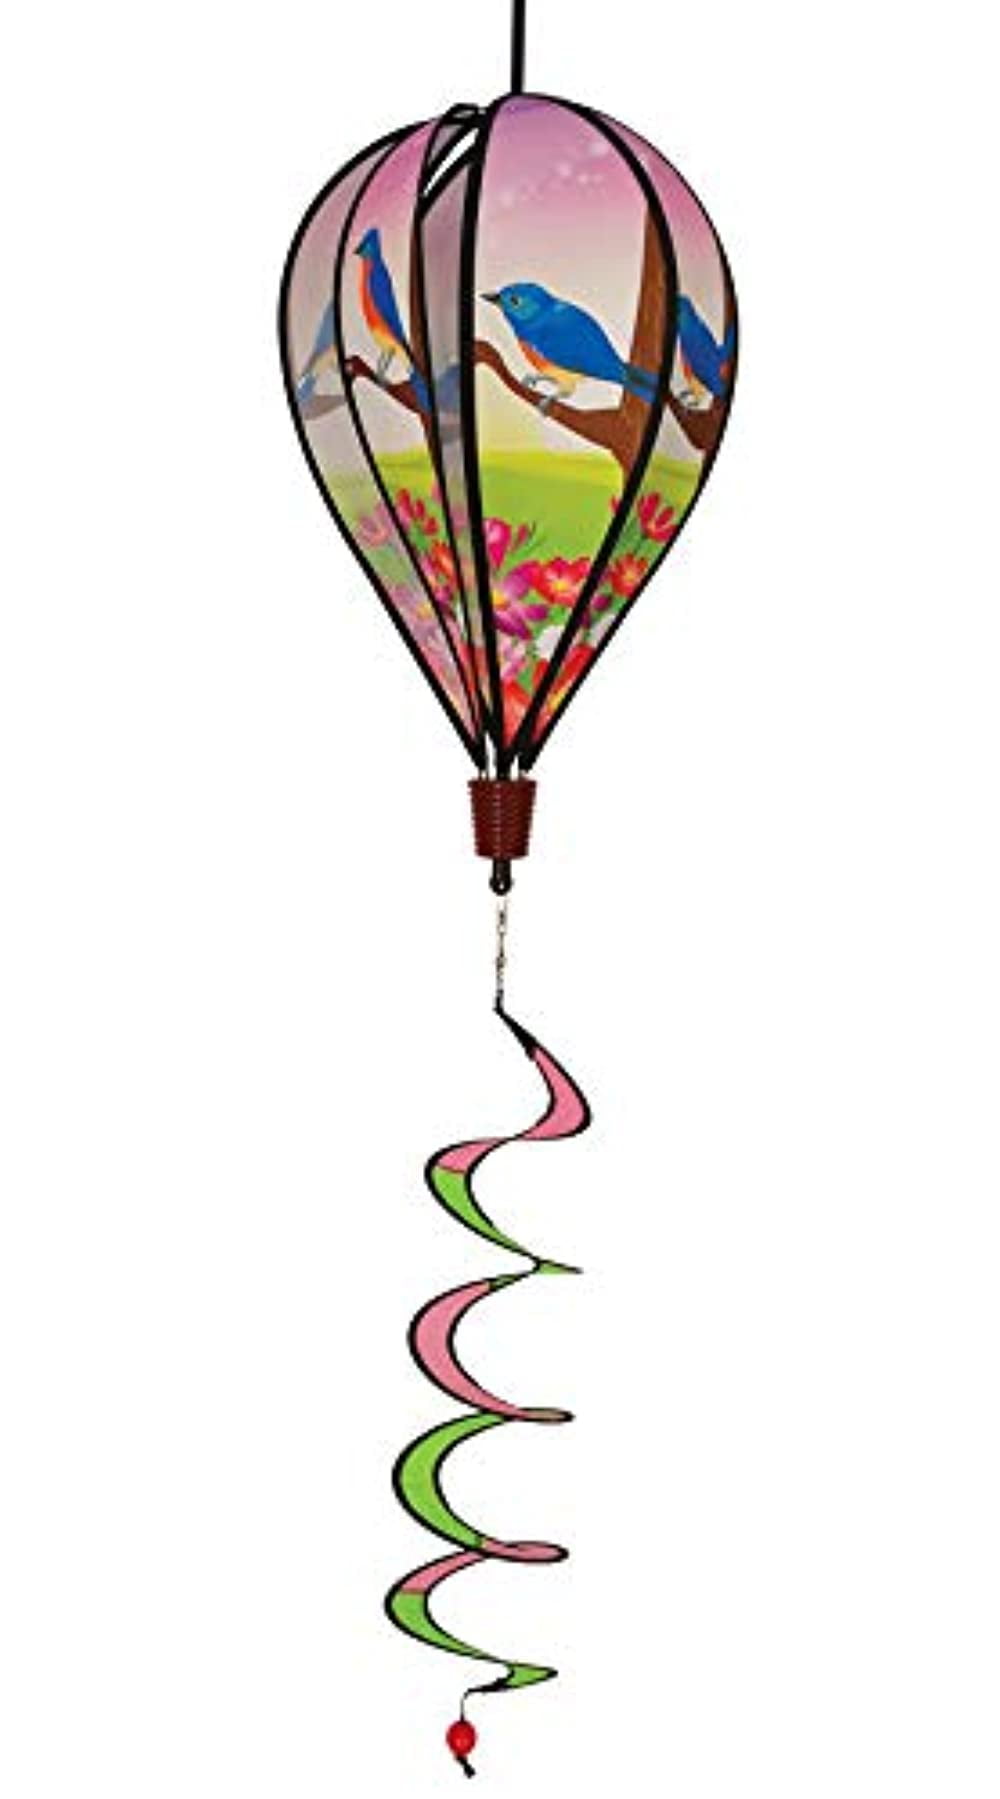 In the Breeze Patriot Eagle 6-Panel Kinetic Hot Air Balloon Wind Spinner 